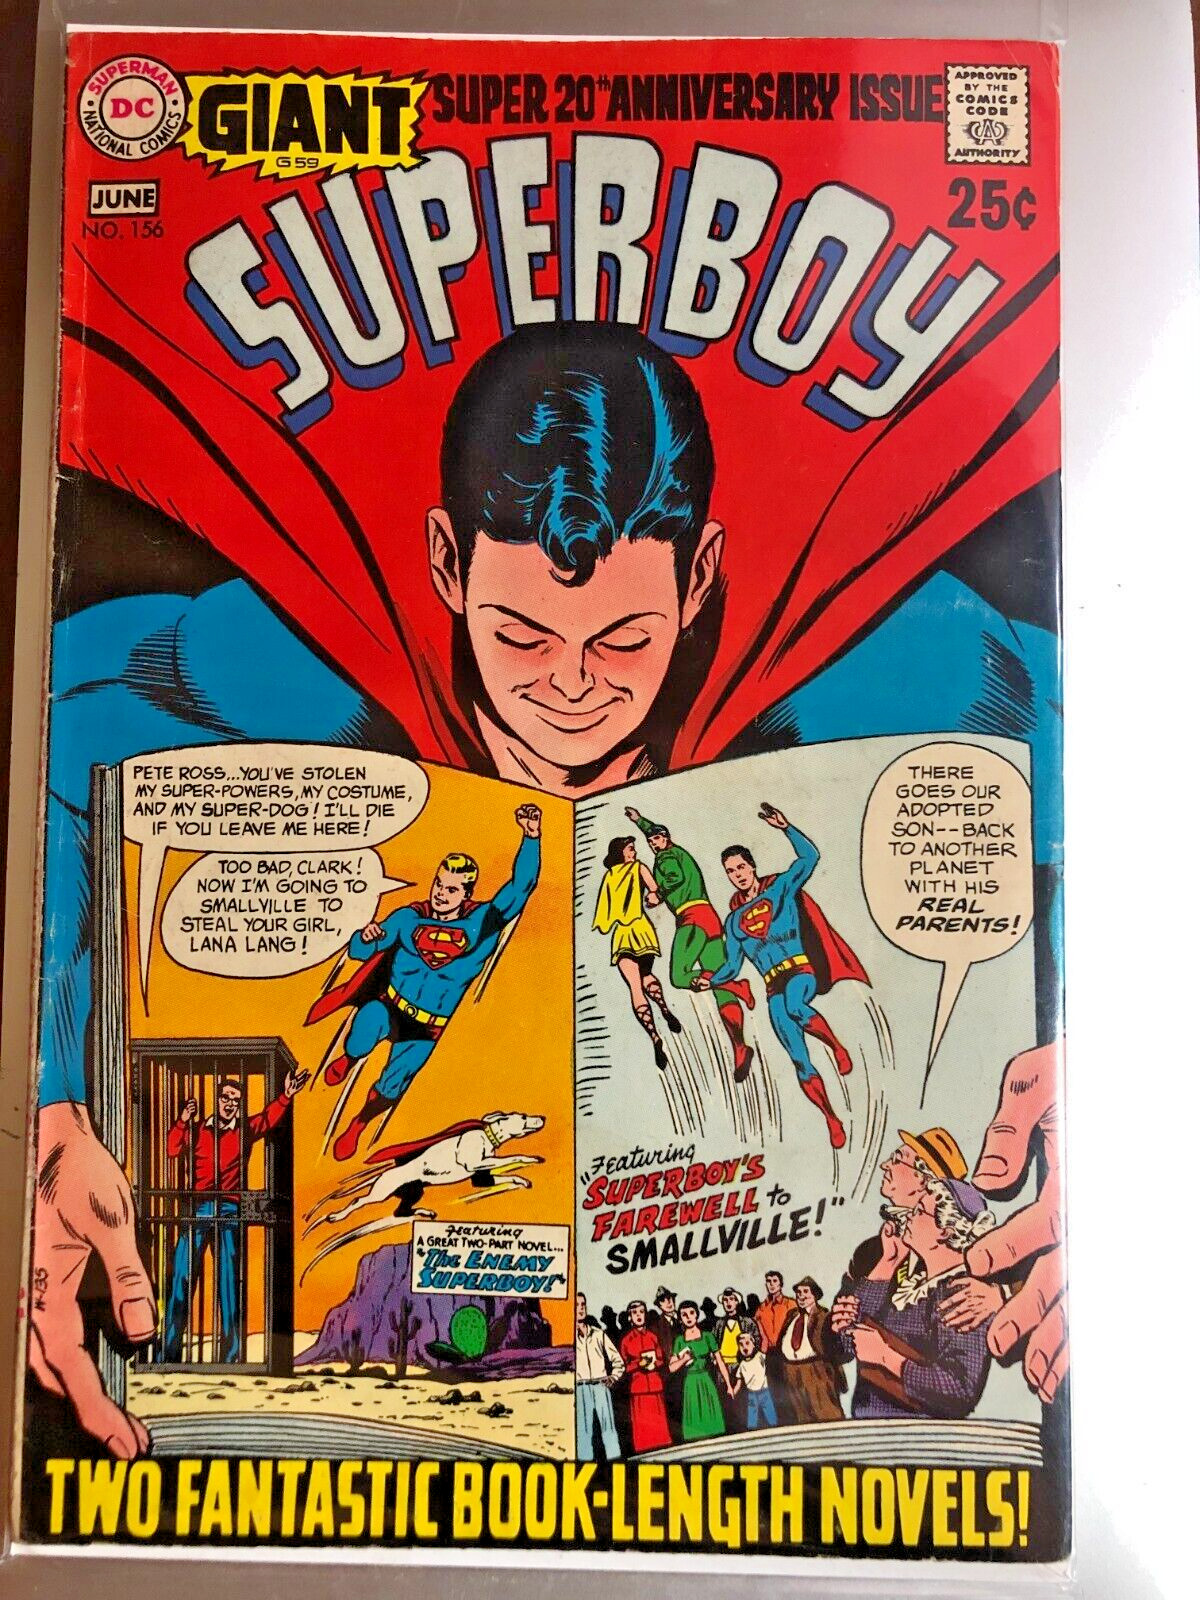 SUPERBOY #156 June 1969 Giant Sized Vintage Silver Age DC Comics Nice Condition